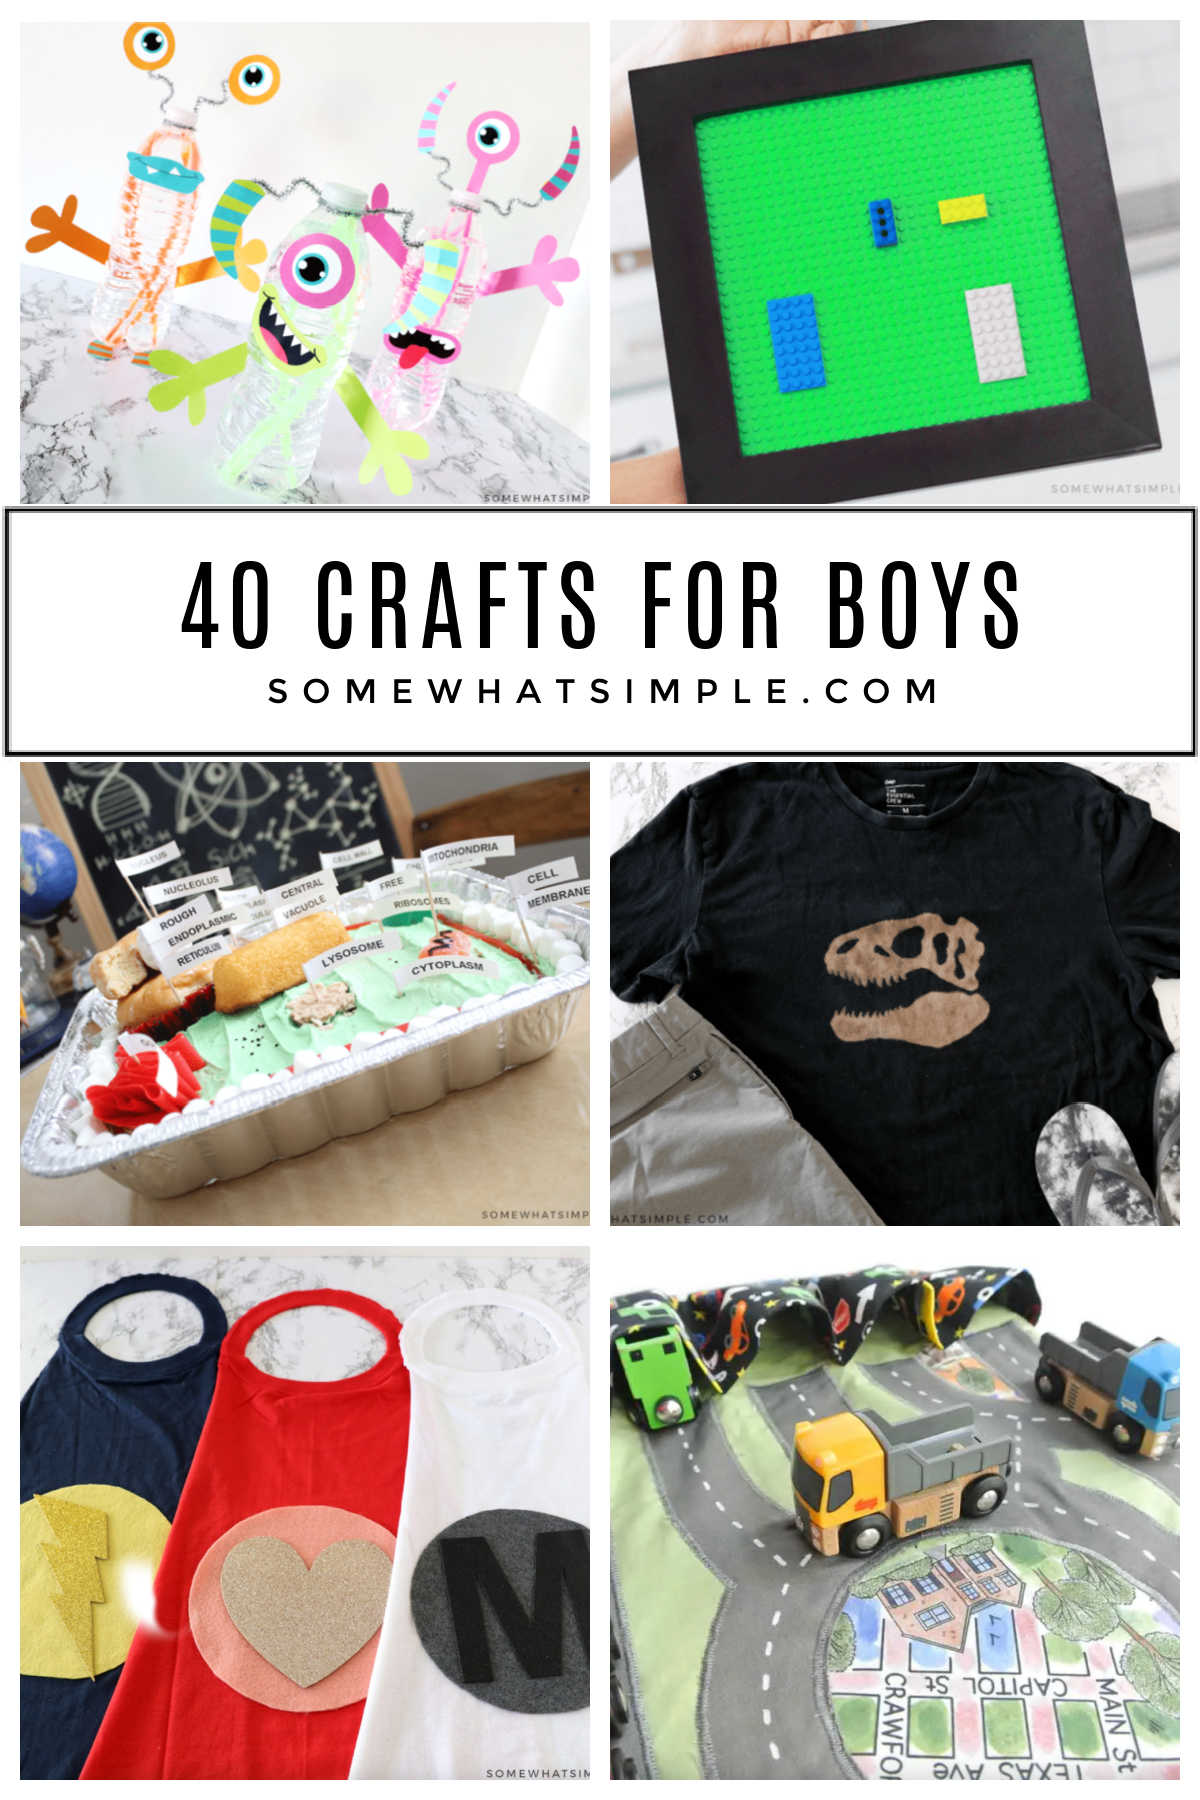 Cool crafts for tweens - The Craft Train